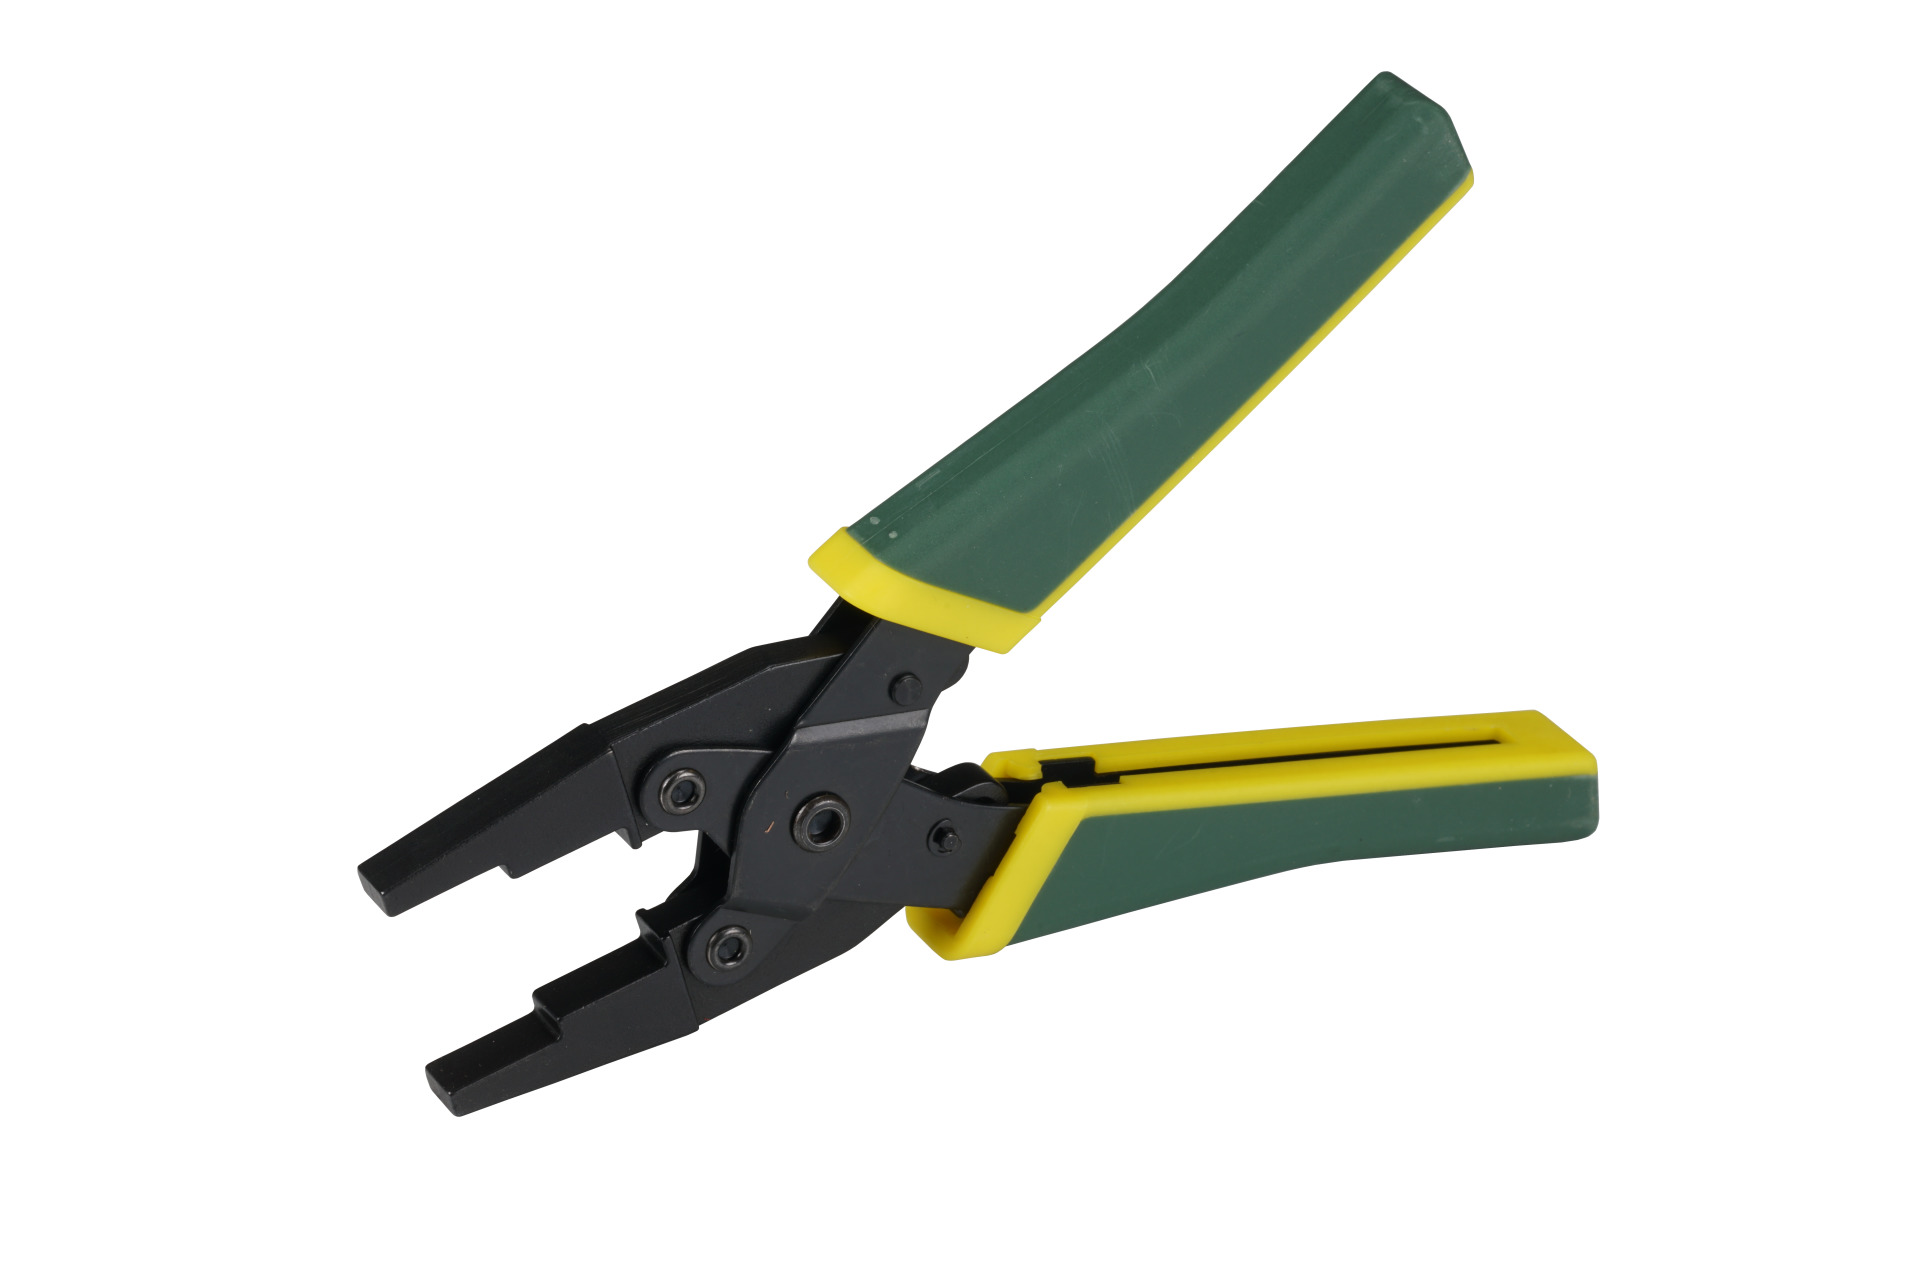 Network parallel pliers 11 - 32mm, for assembling keystones and field connectors